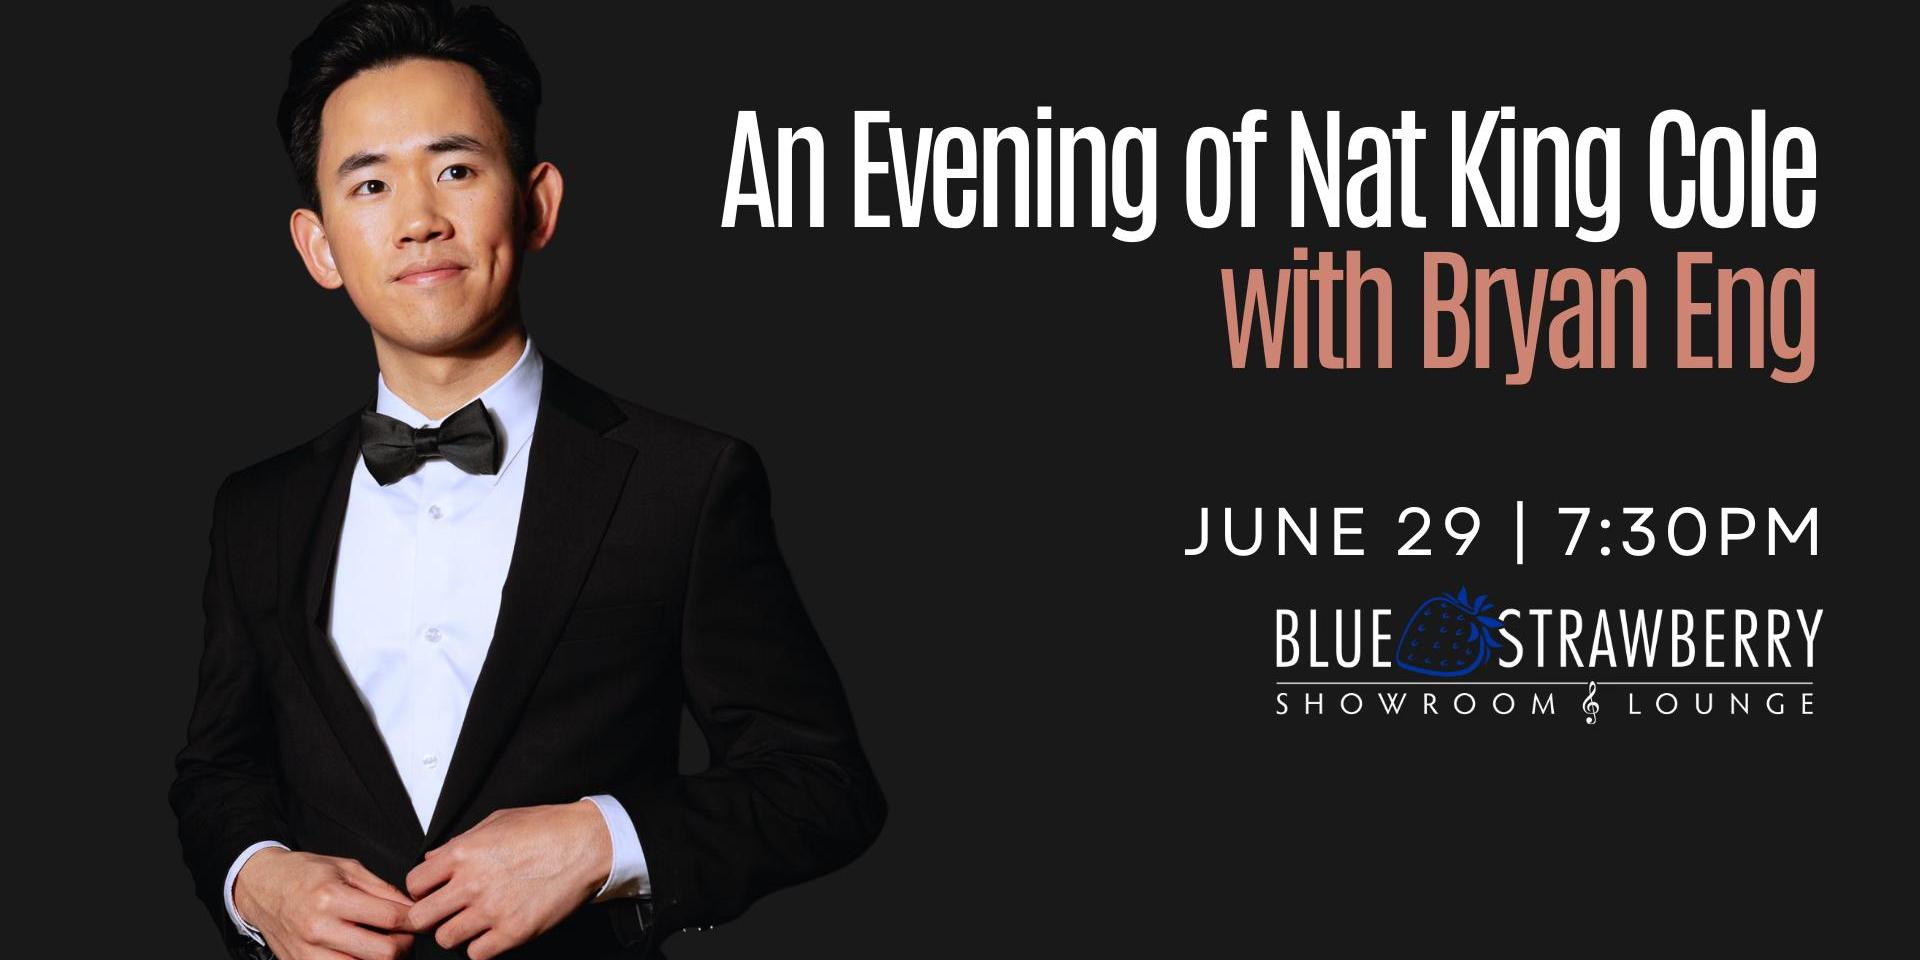 An Evening of Nat King Cole with Bryan Eng promotional image